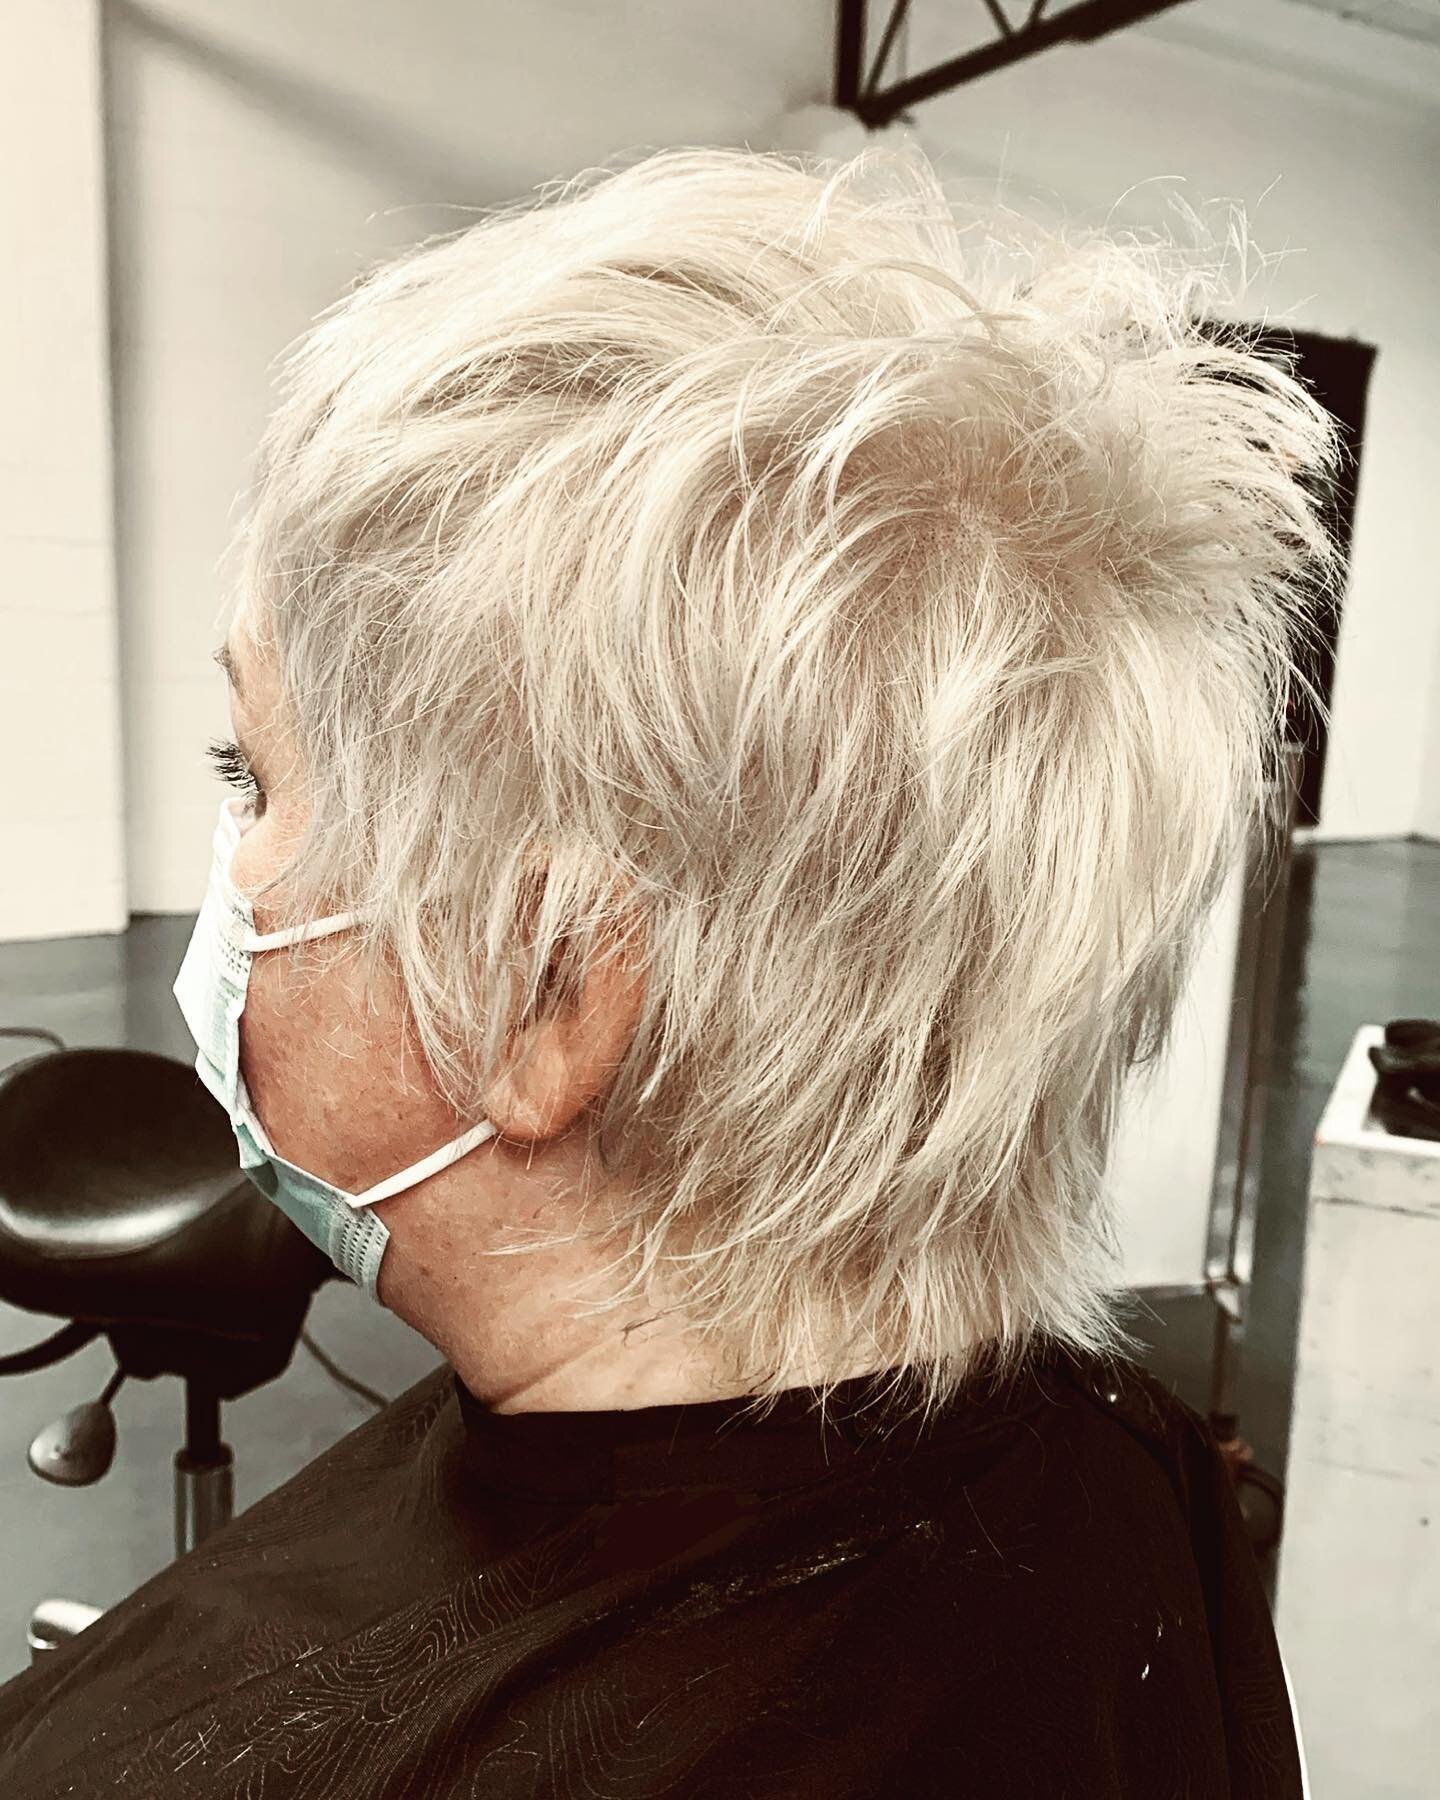 So great being able to spend time with this lovely for a fresh look and thank you #salonproof community you have done it again! In such wavering uncertain times your generosity stays strong and true xx Regrowth sorted, interview ready! We all have ou